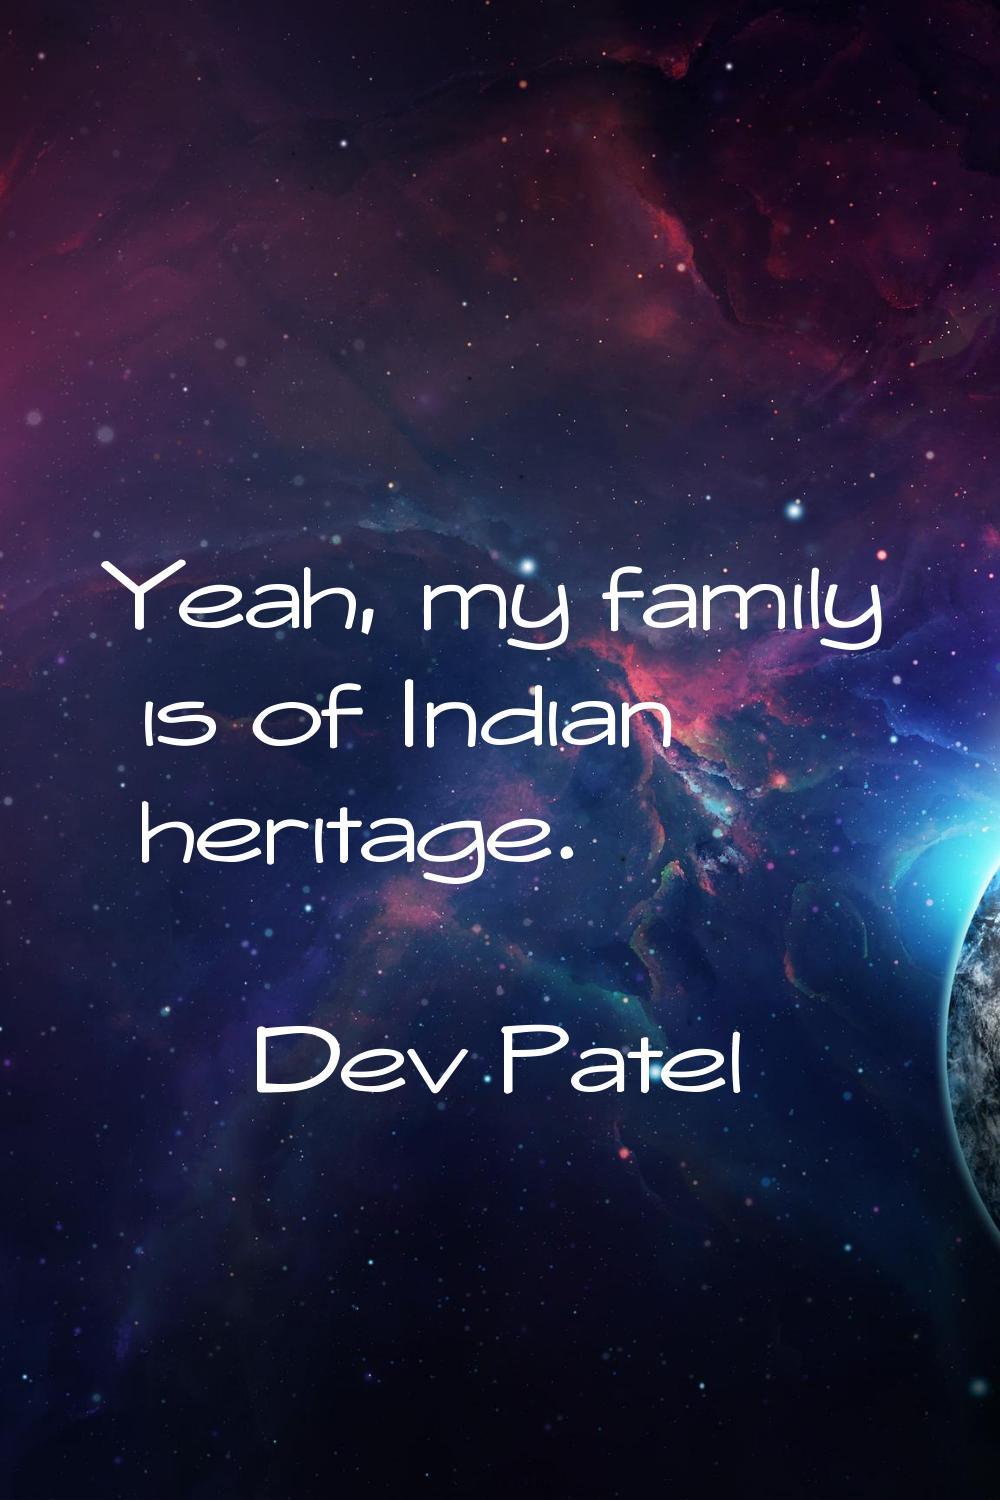 Yeah, my family is of Indian heritage.